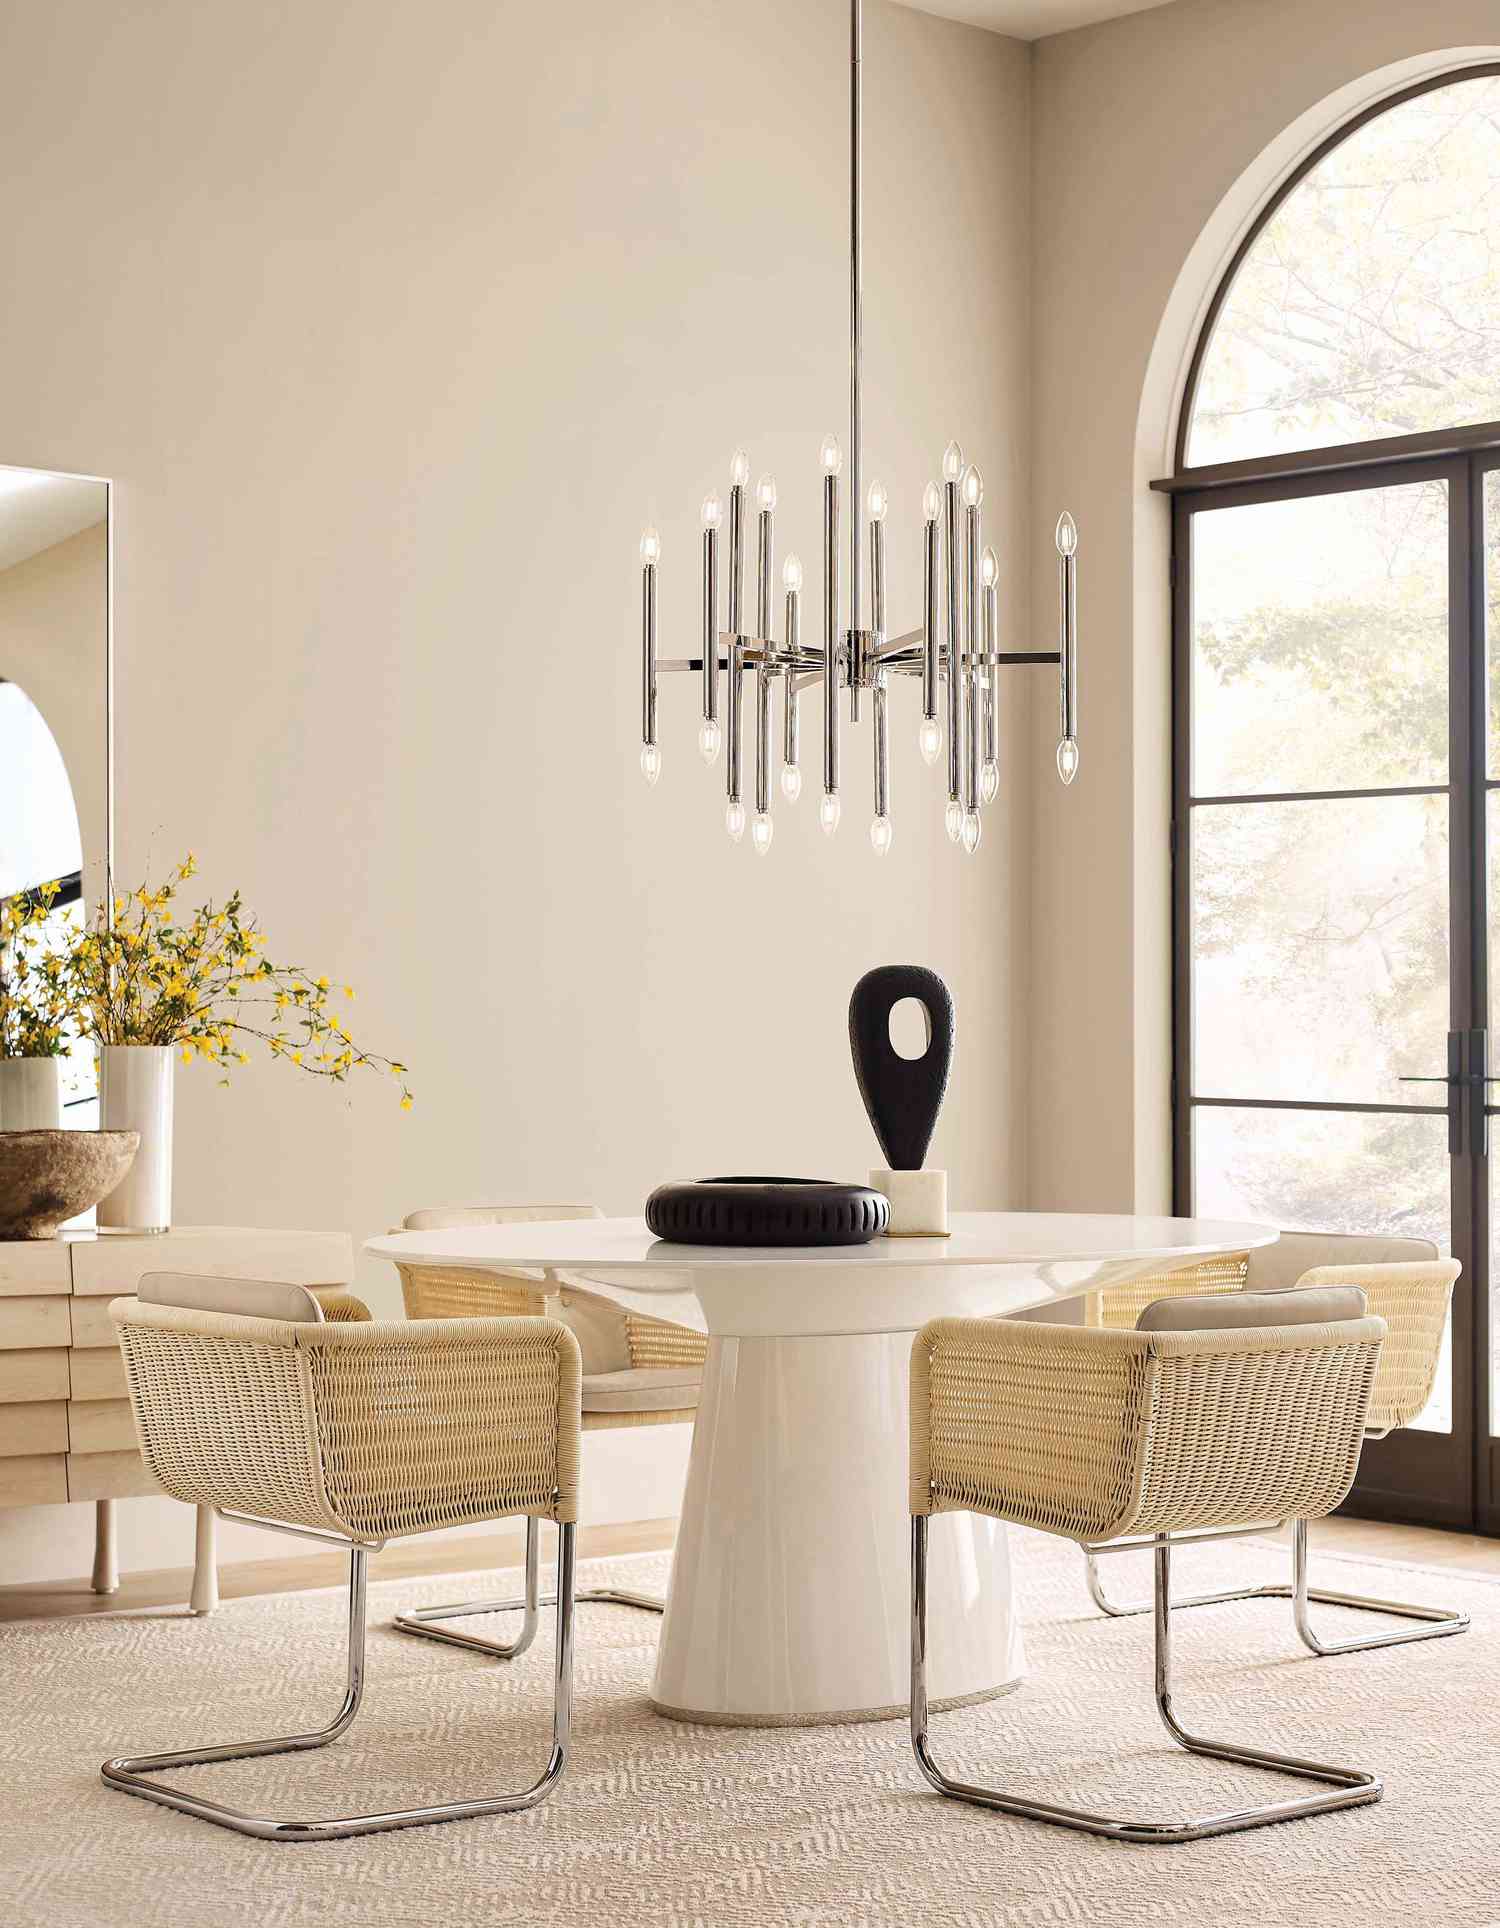 Color trend predictions for 2022 - neutral by Sherwin-williams